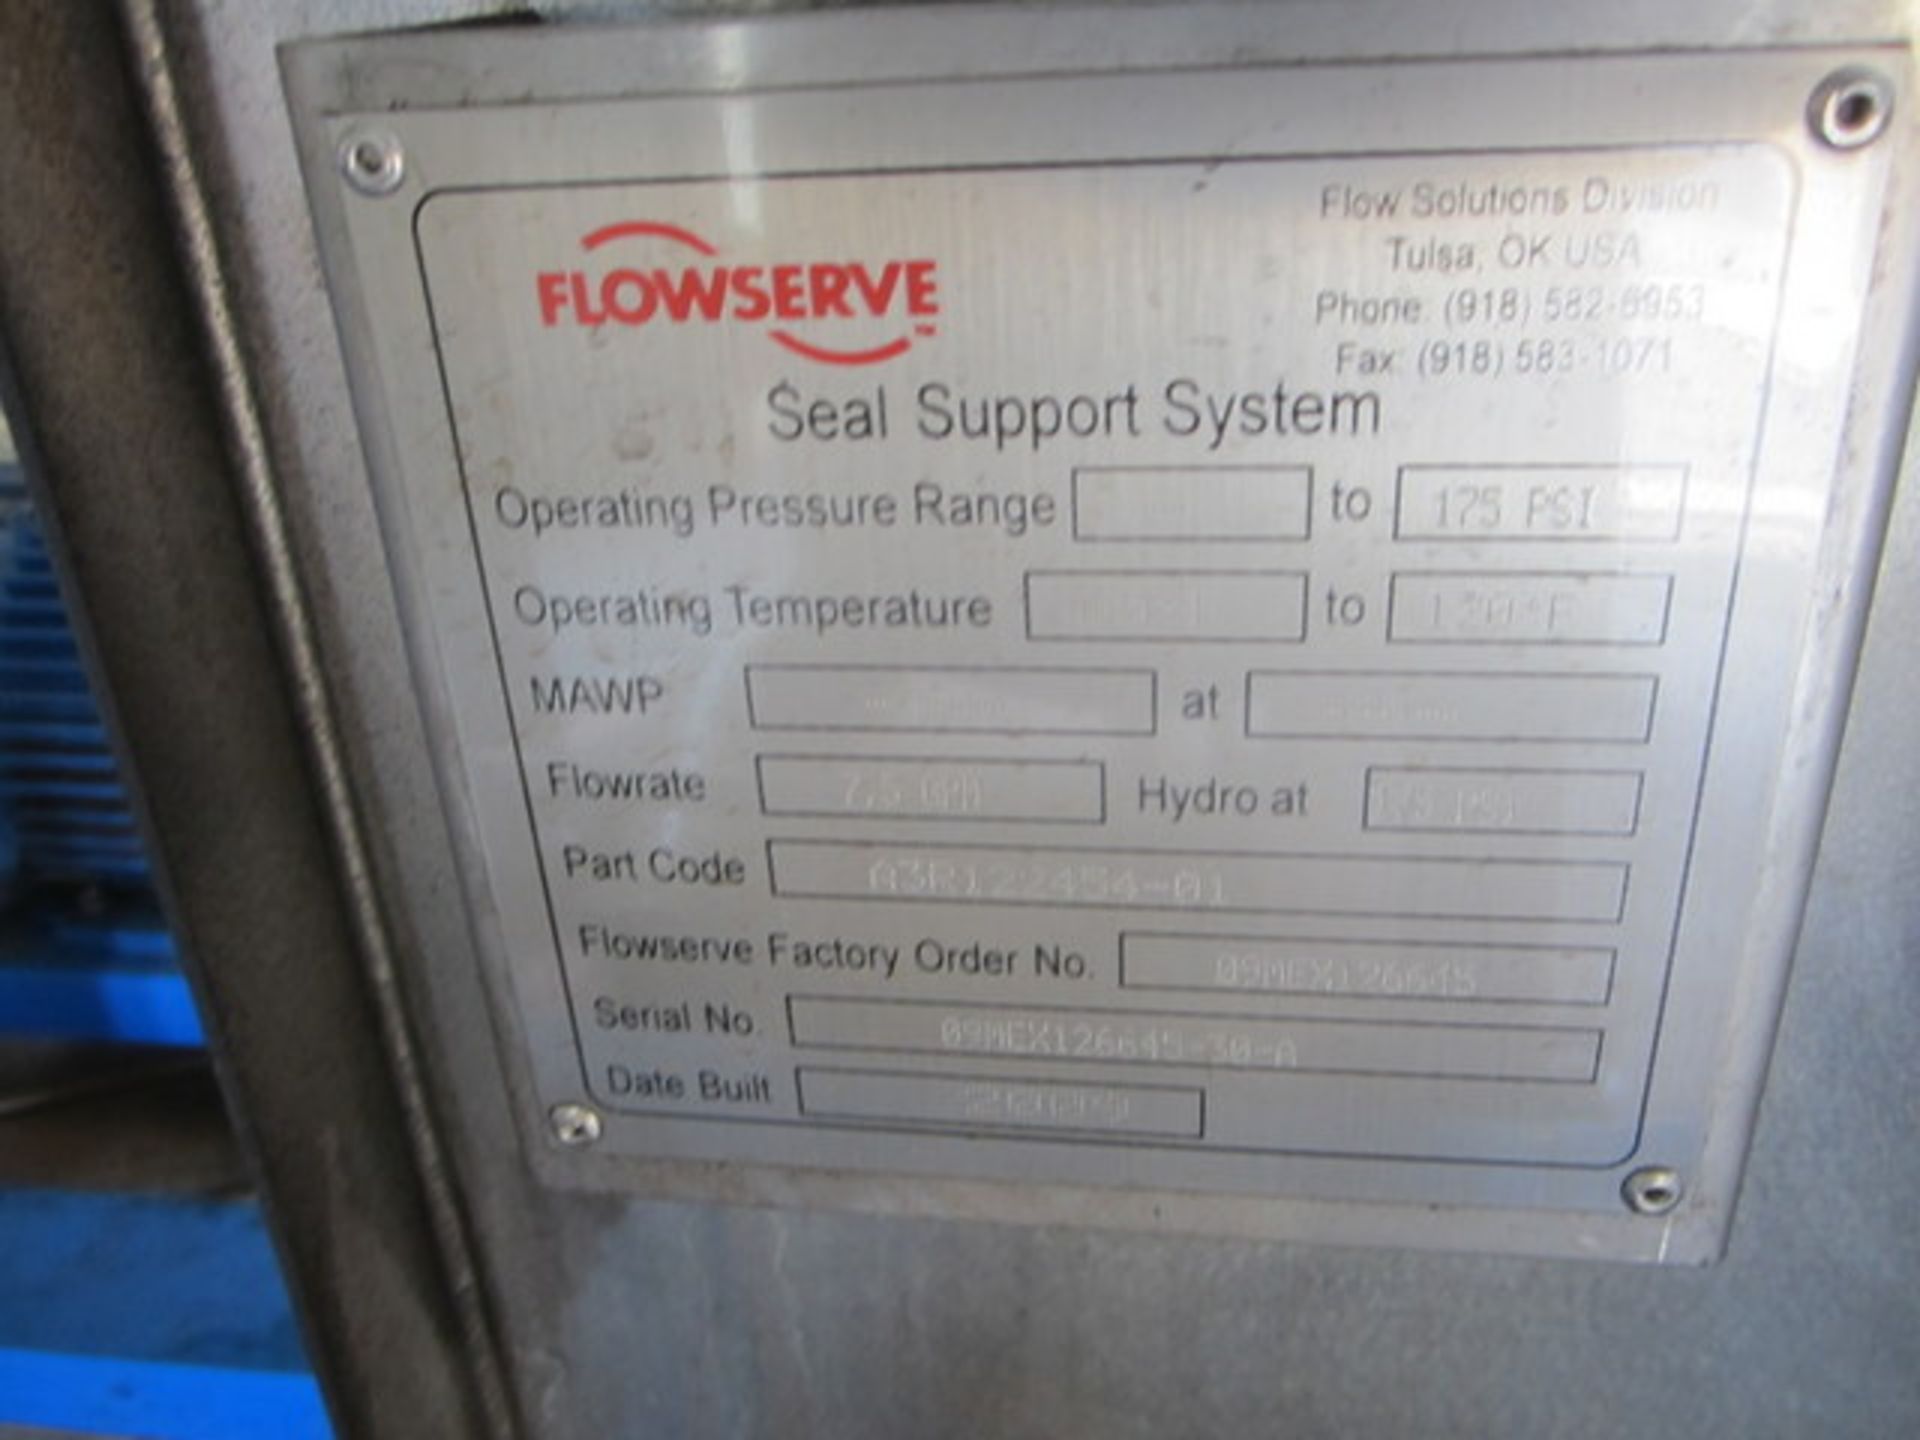 (Located in Lebanon, NJ) Flowserve Filter System, Rated 175 PSI, Assorted Gages - Image 3 of 3